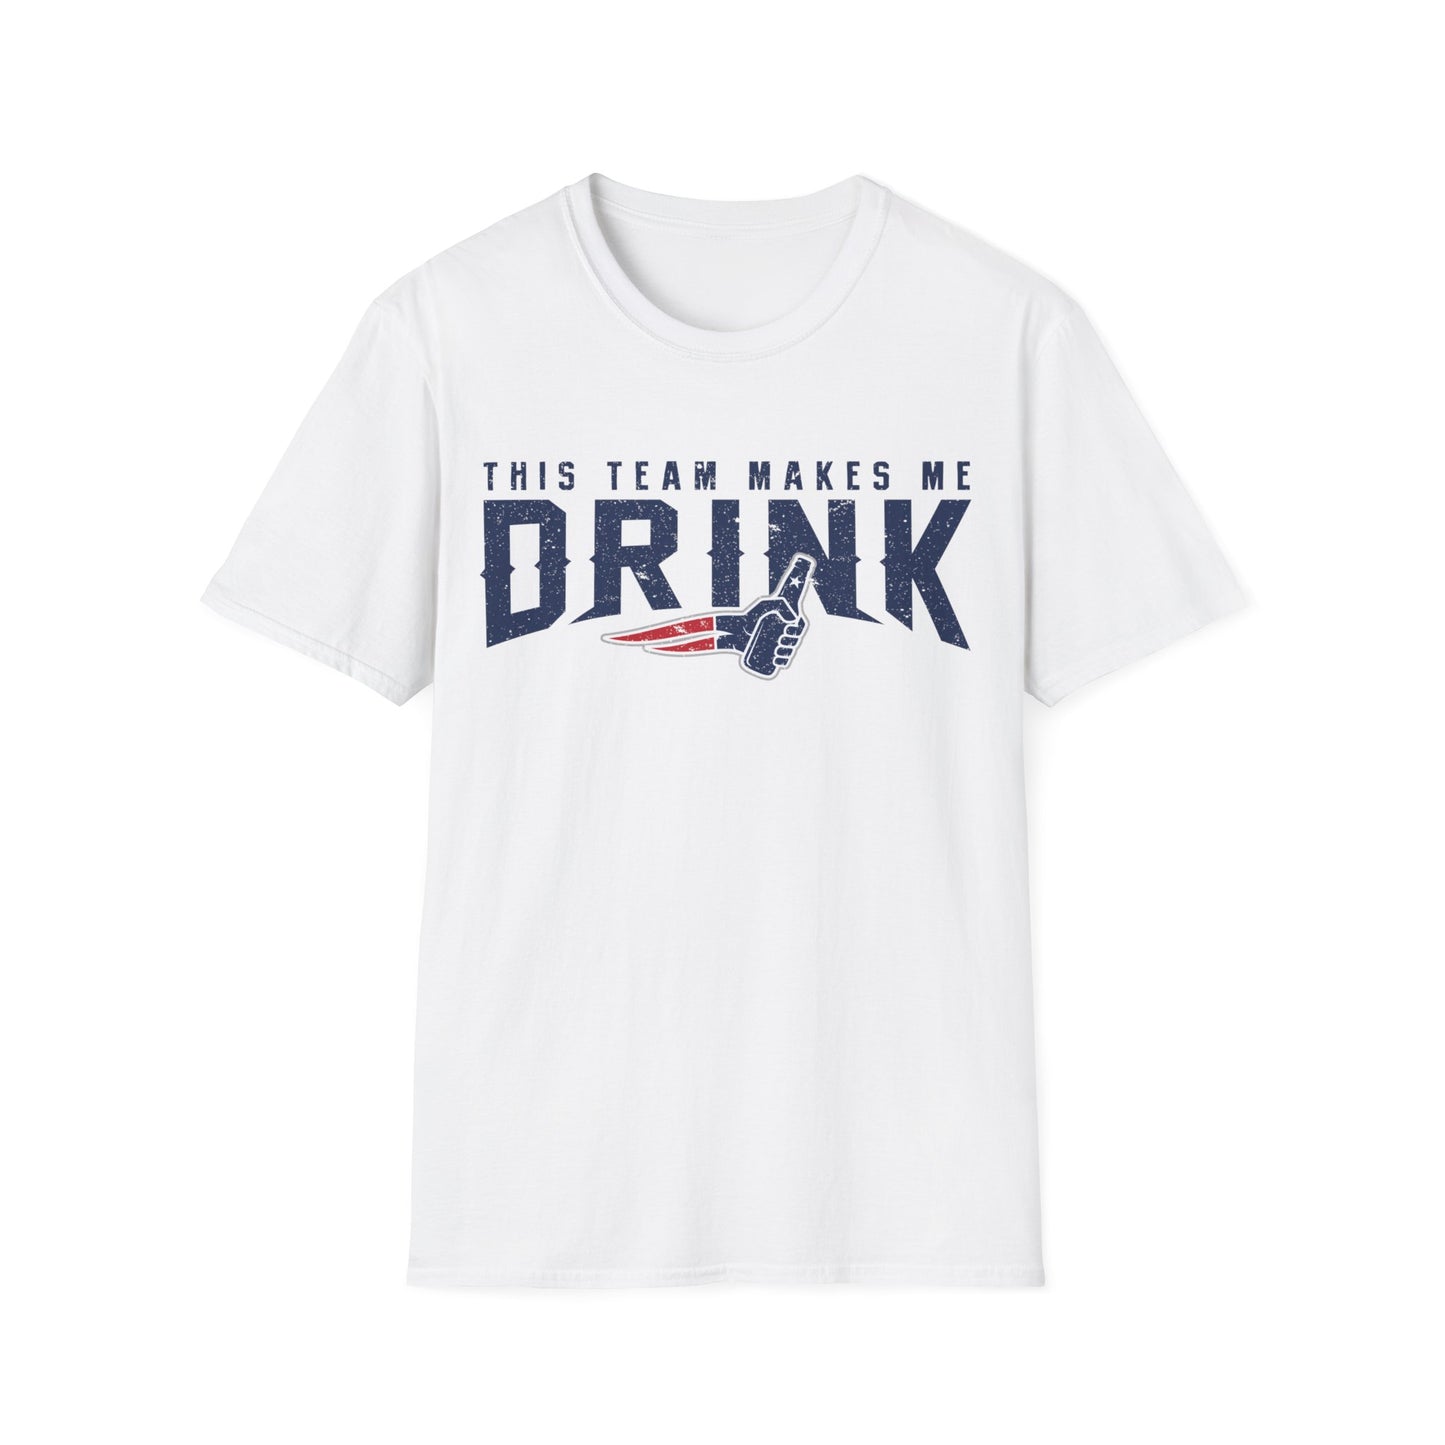 New England This Team Makes Me Drink T-shirt